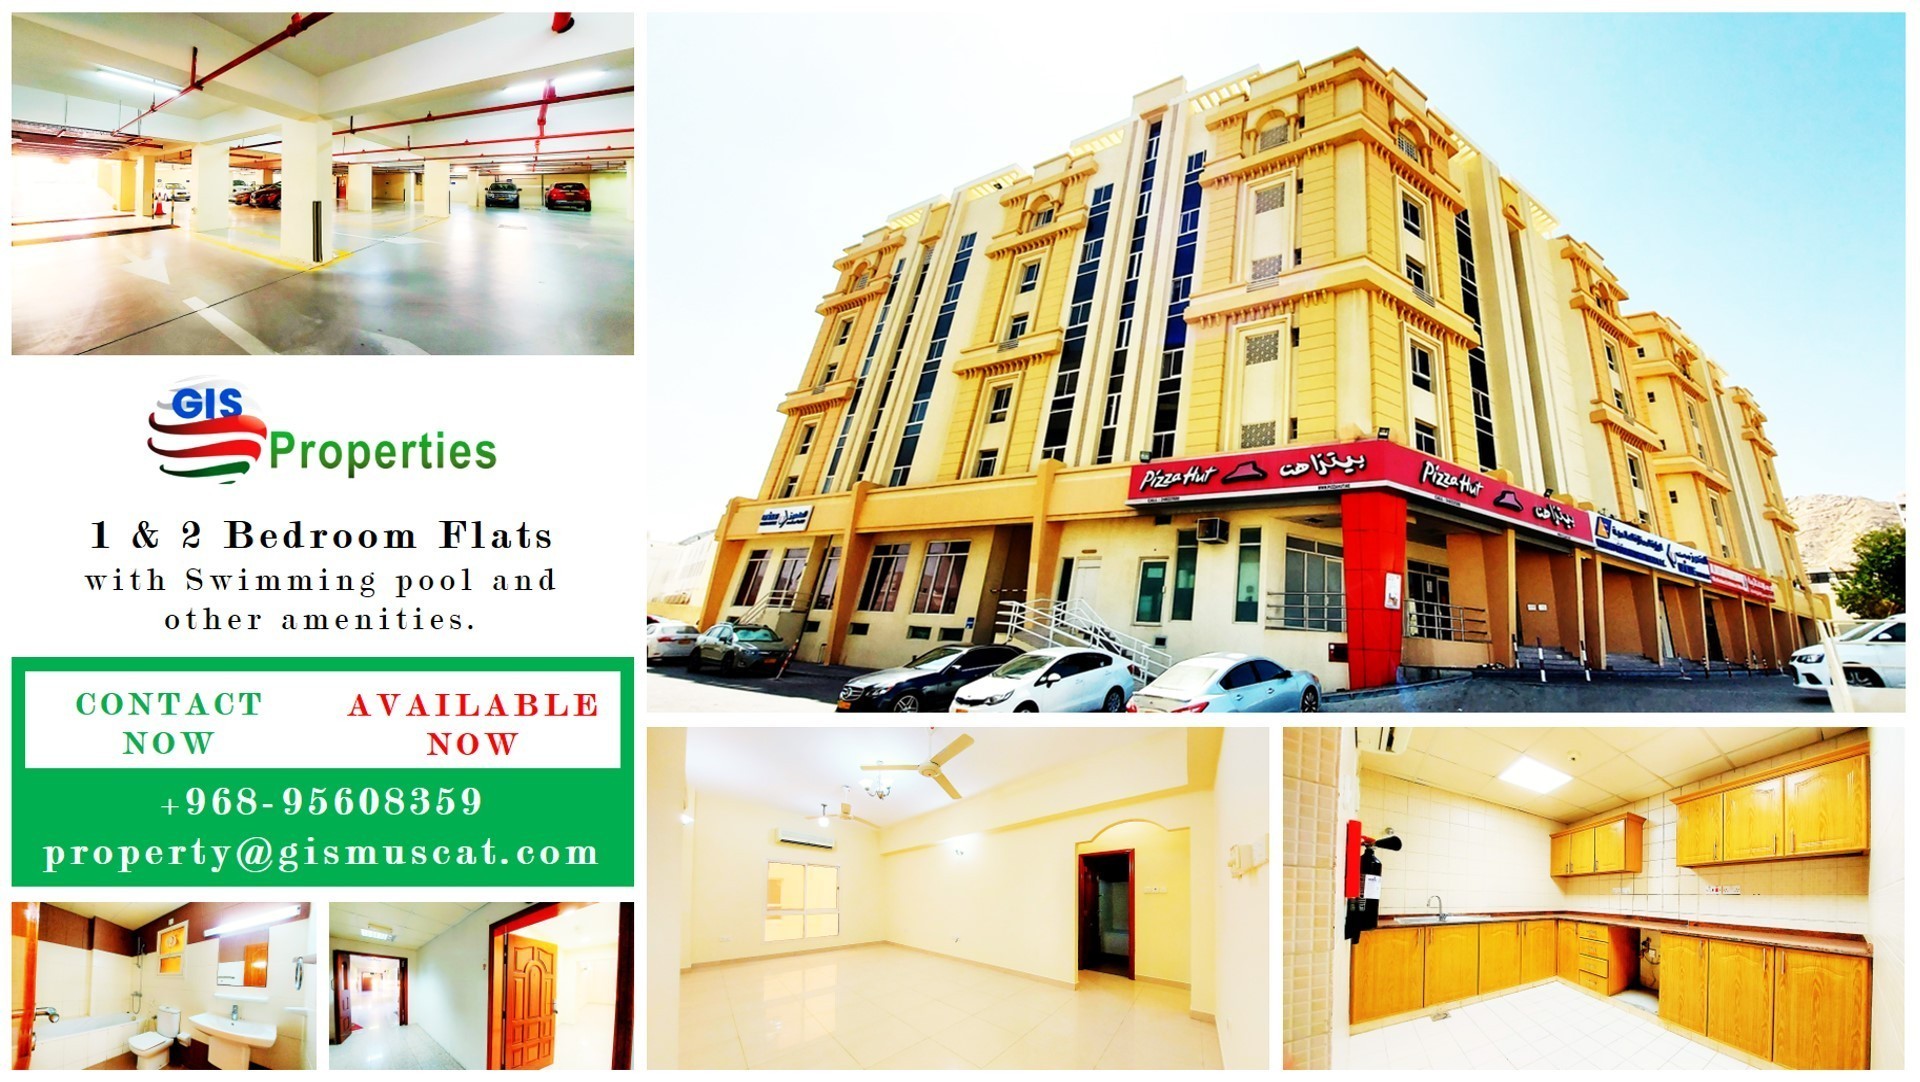 GIS Properties  Apartments Rooms and Office Space for Rent in Oman